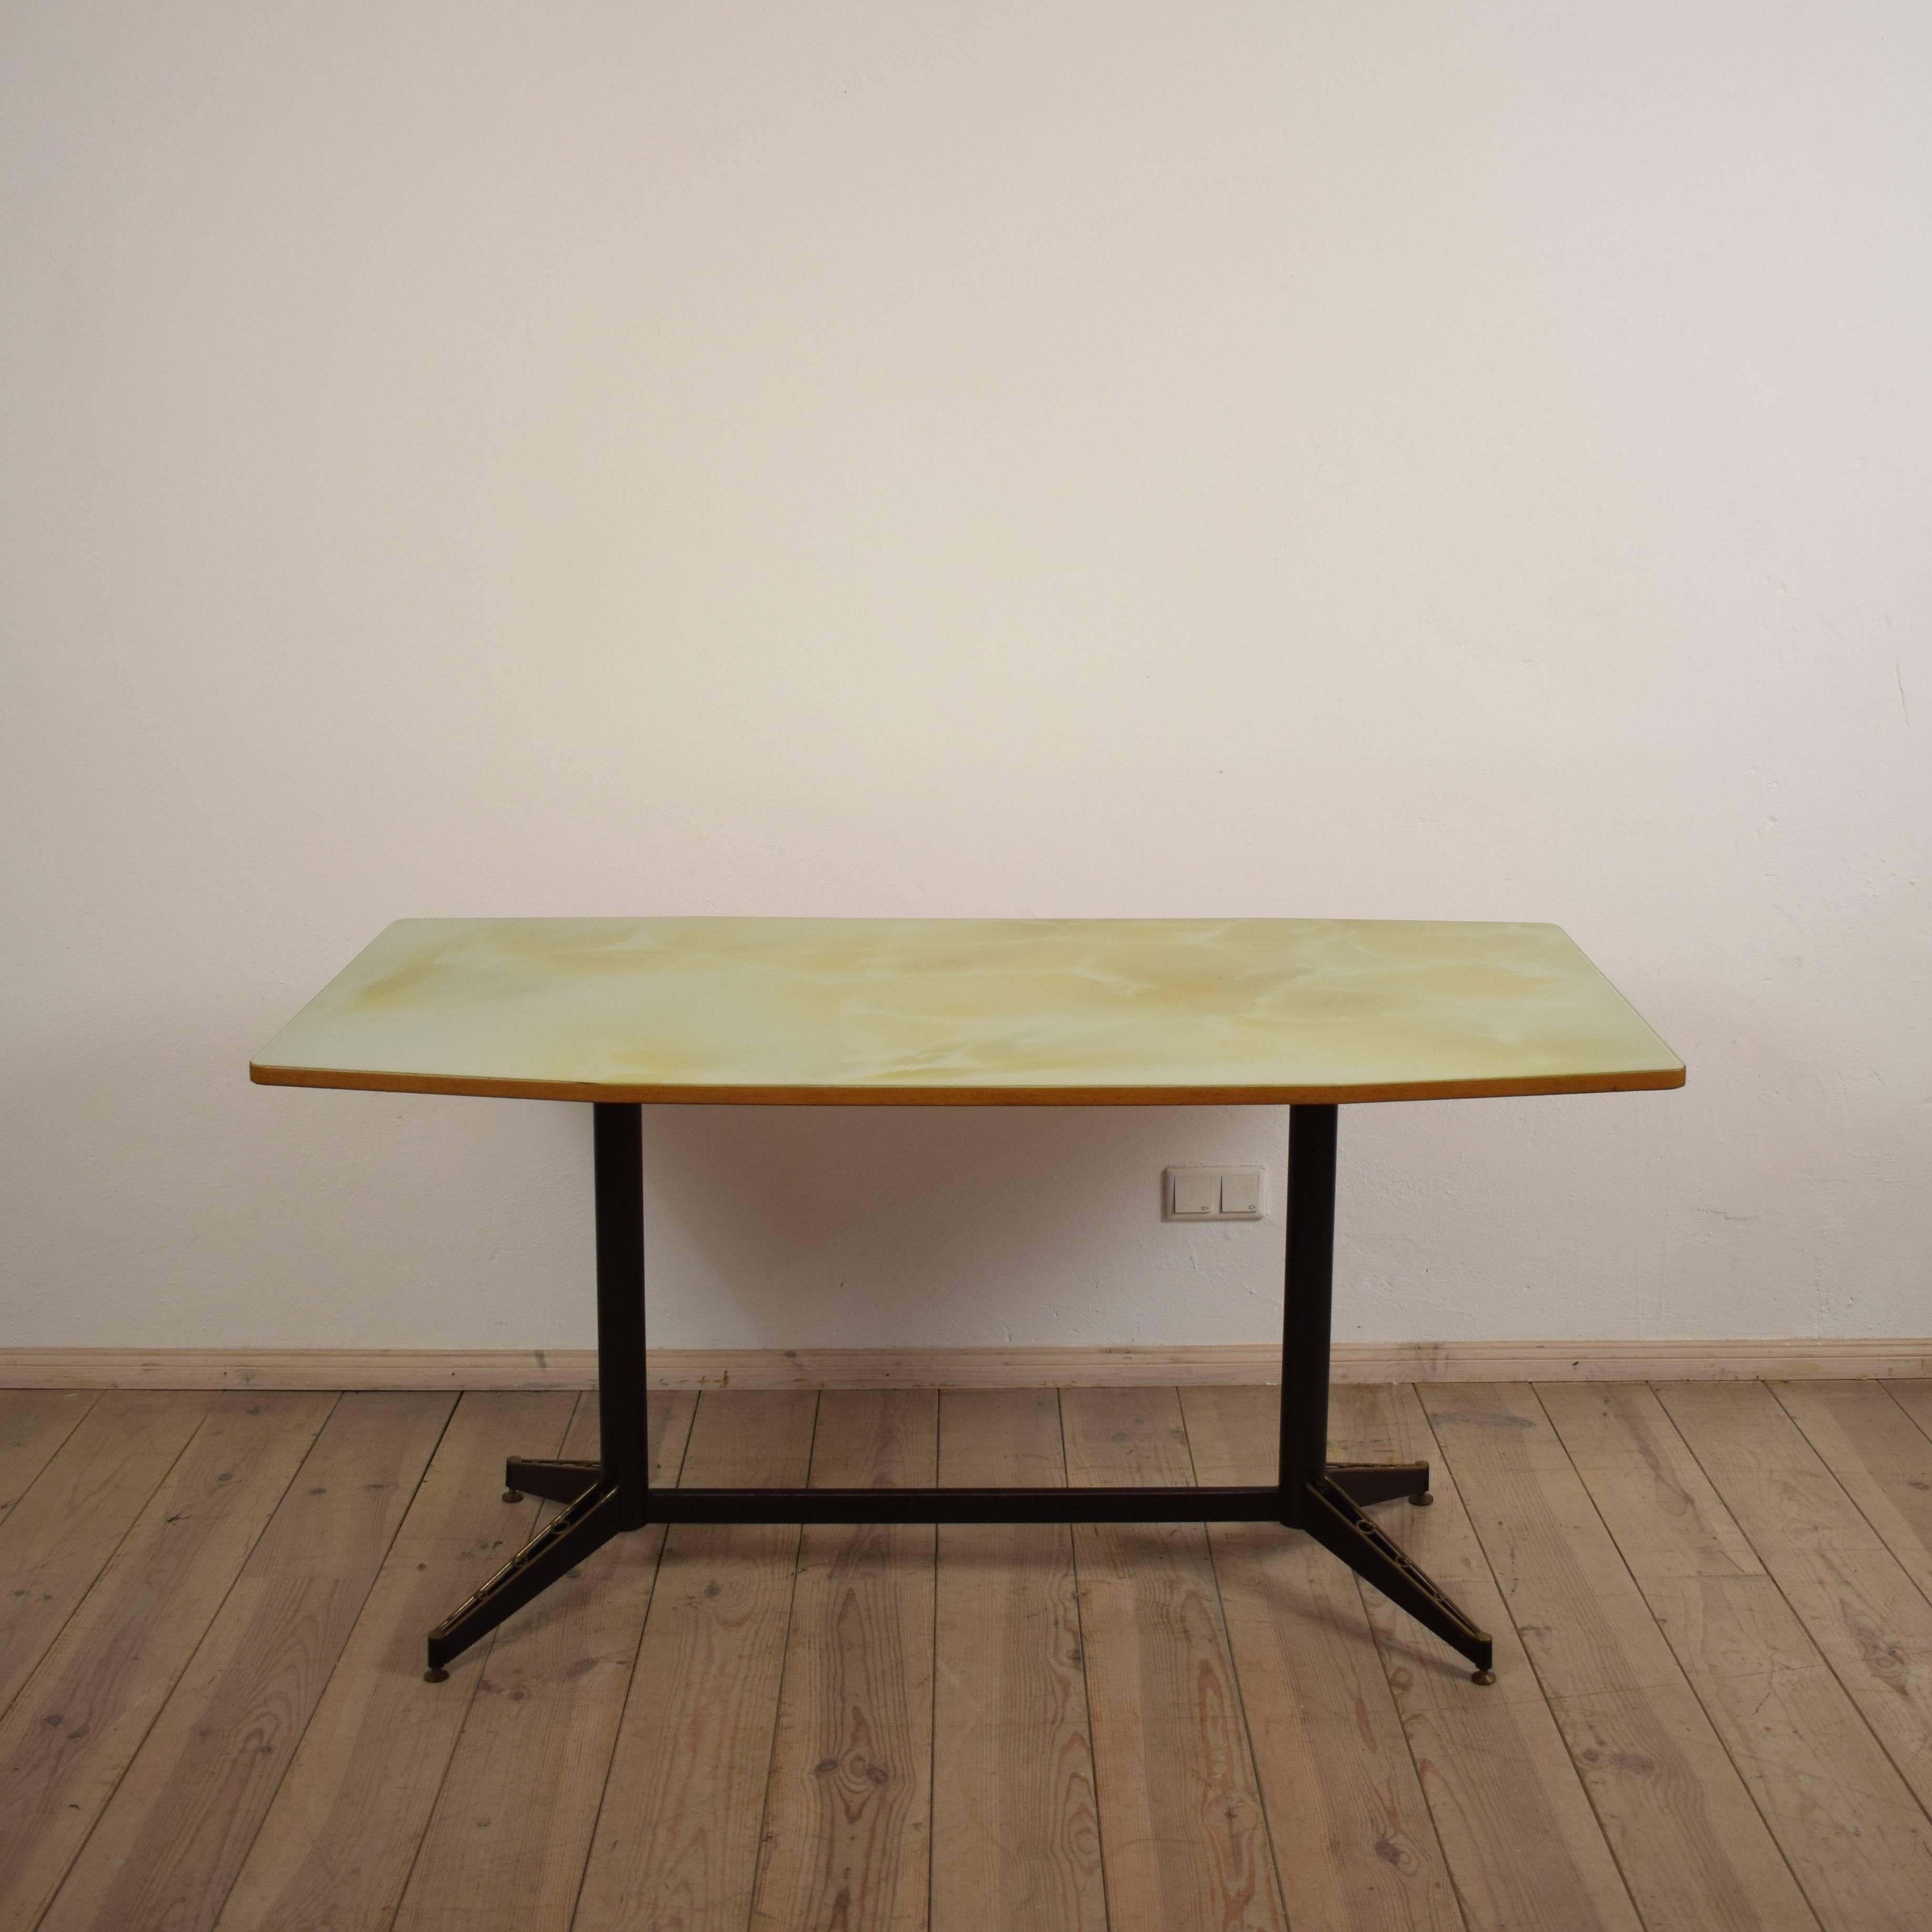 This elegant glass top dining table shows the great design of the 1950s in Italy. The glass top is painted on the back and locks like light green marble. The metal base is a clean design with some great brass features on the end of the legs. This